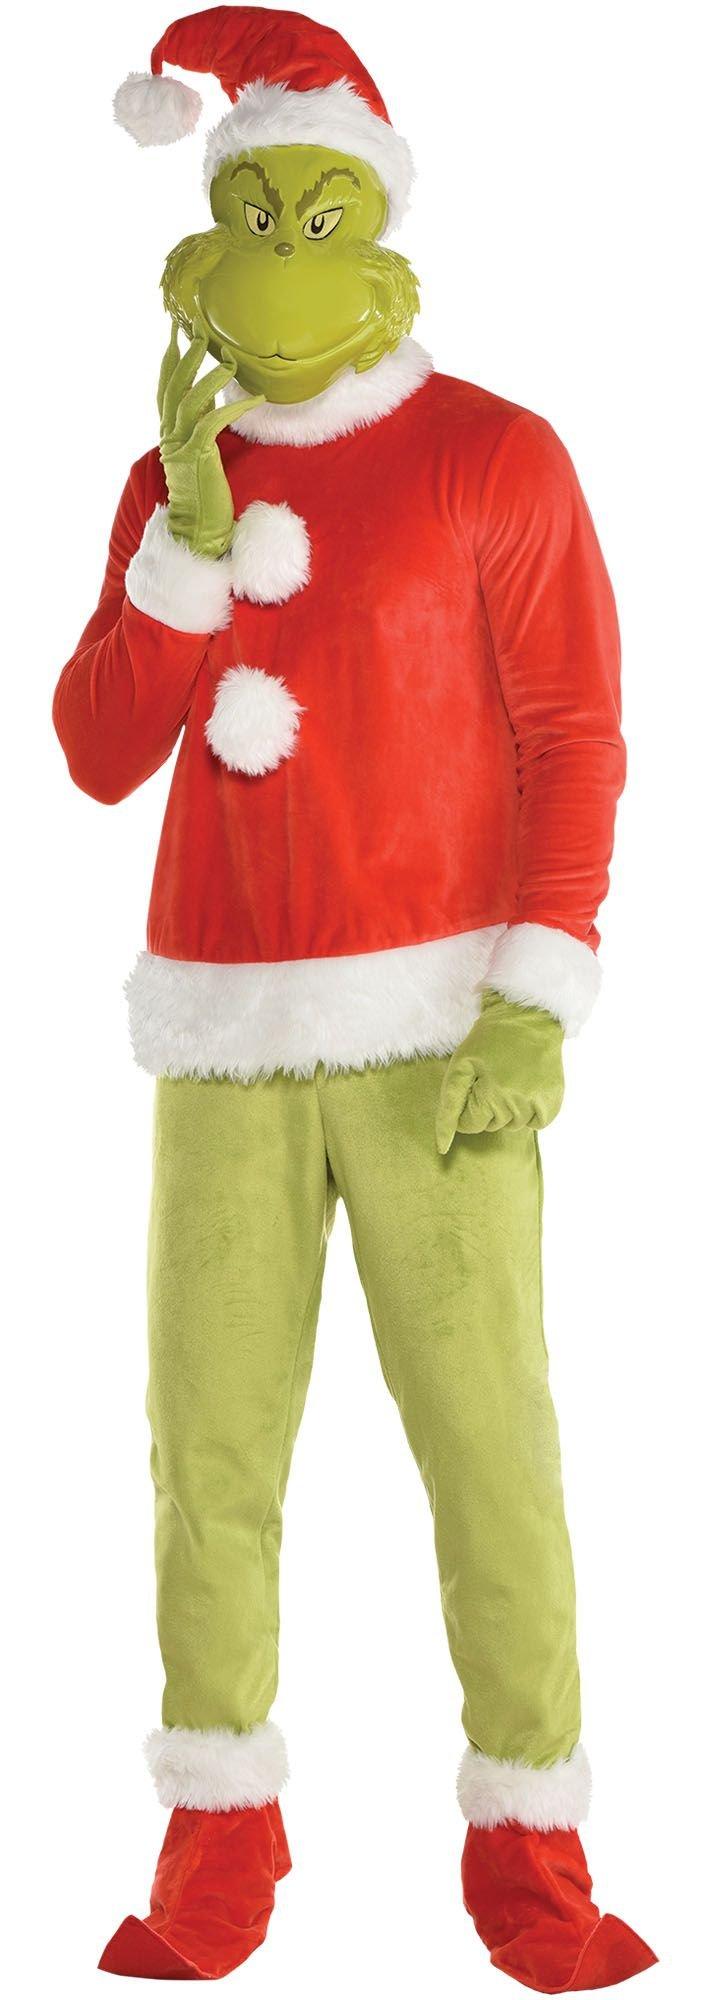 Adult Plus Size The Grinch Deluxe Jumpsuit with Latex Mask